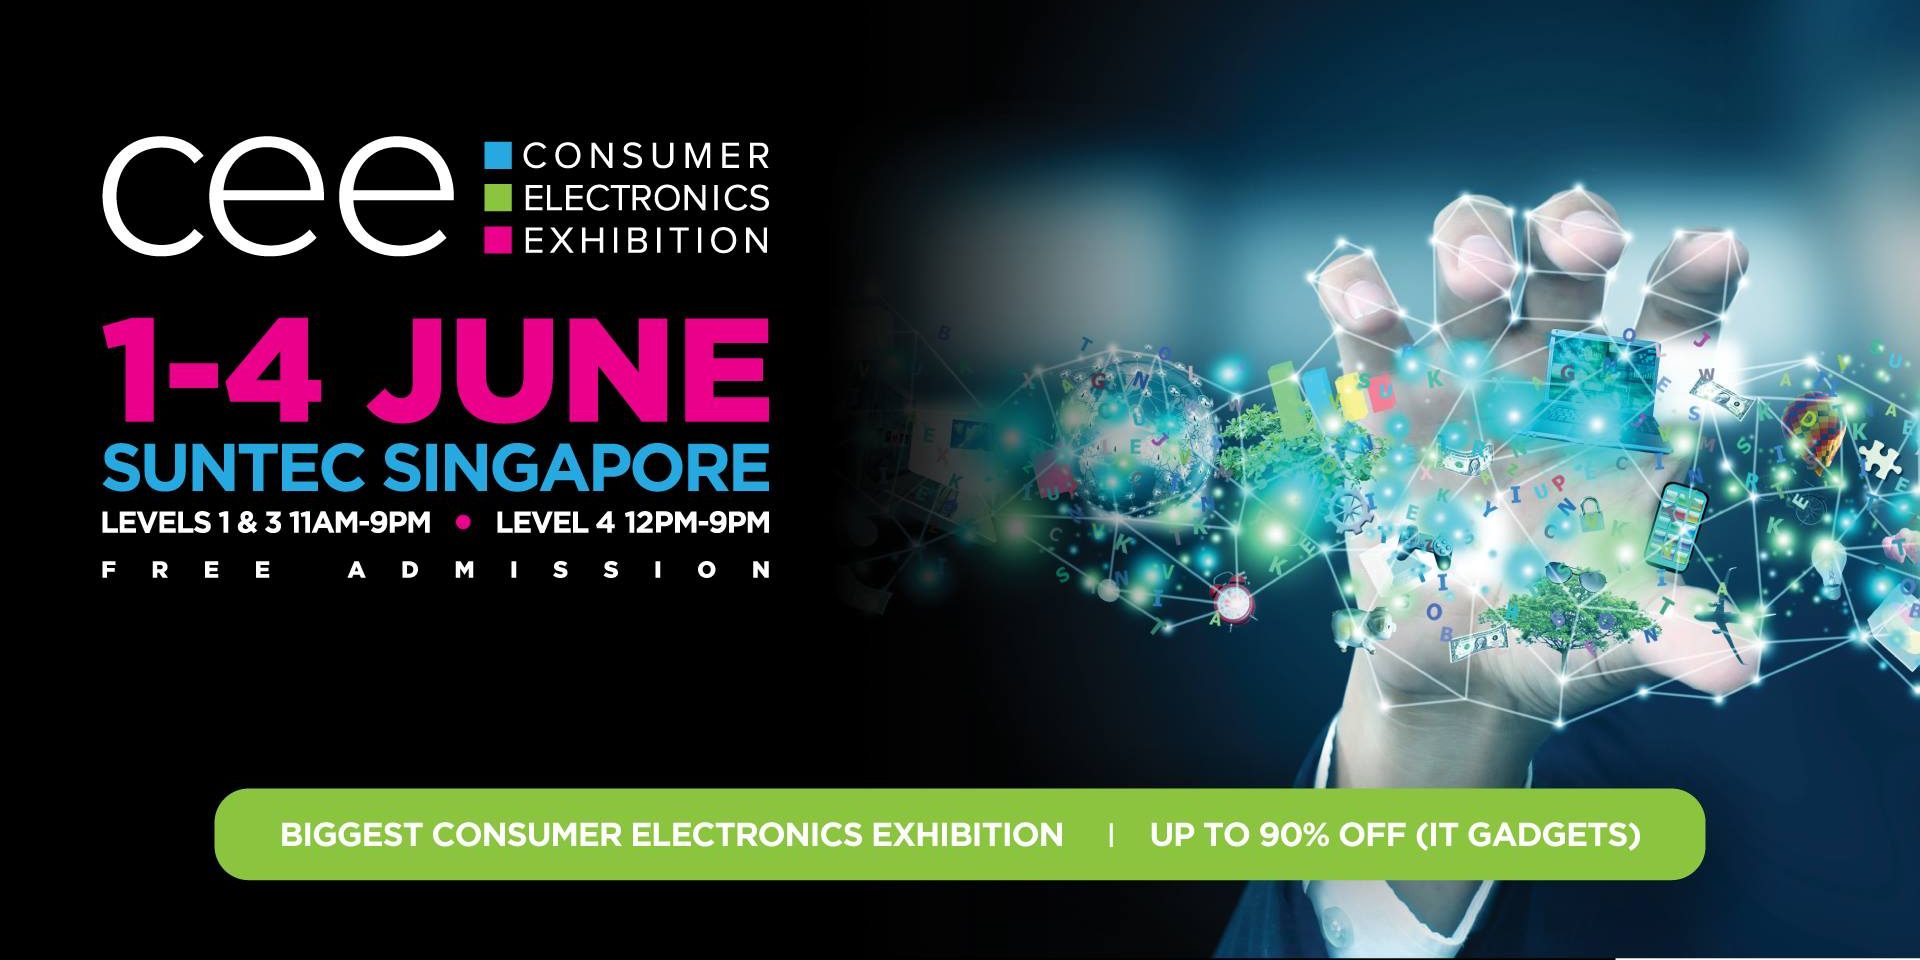 Consumer Electronics Exhibition at Suntec City Singapore Up to 90% Off Promotion 1-4 Jun 2017